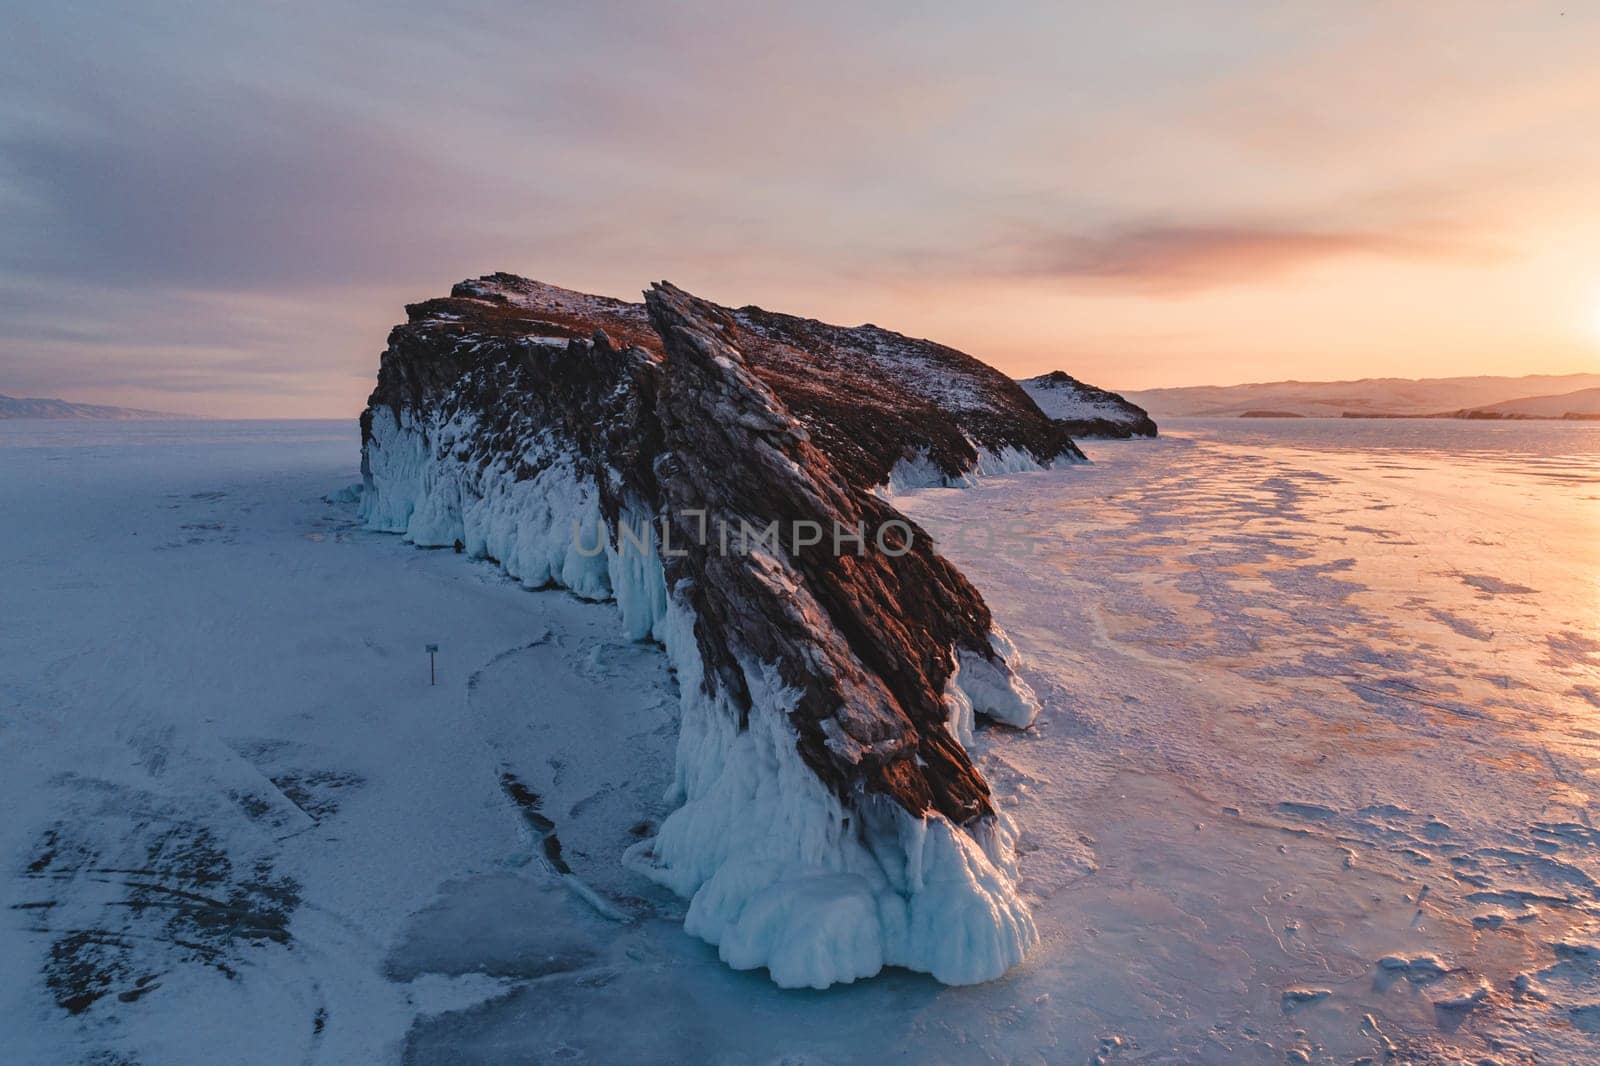 Aerial over the rocky island in lake Baikal. Winter landscape of frozen Baikal at beautiful orange sunrise. Sun reflections on the ice. Popular tourist spot by Busker